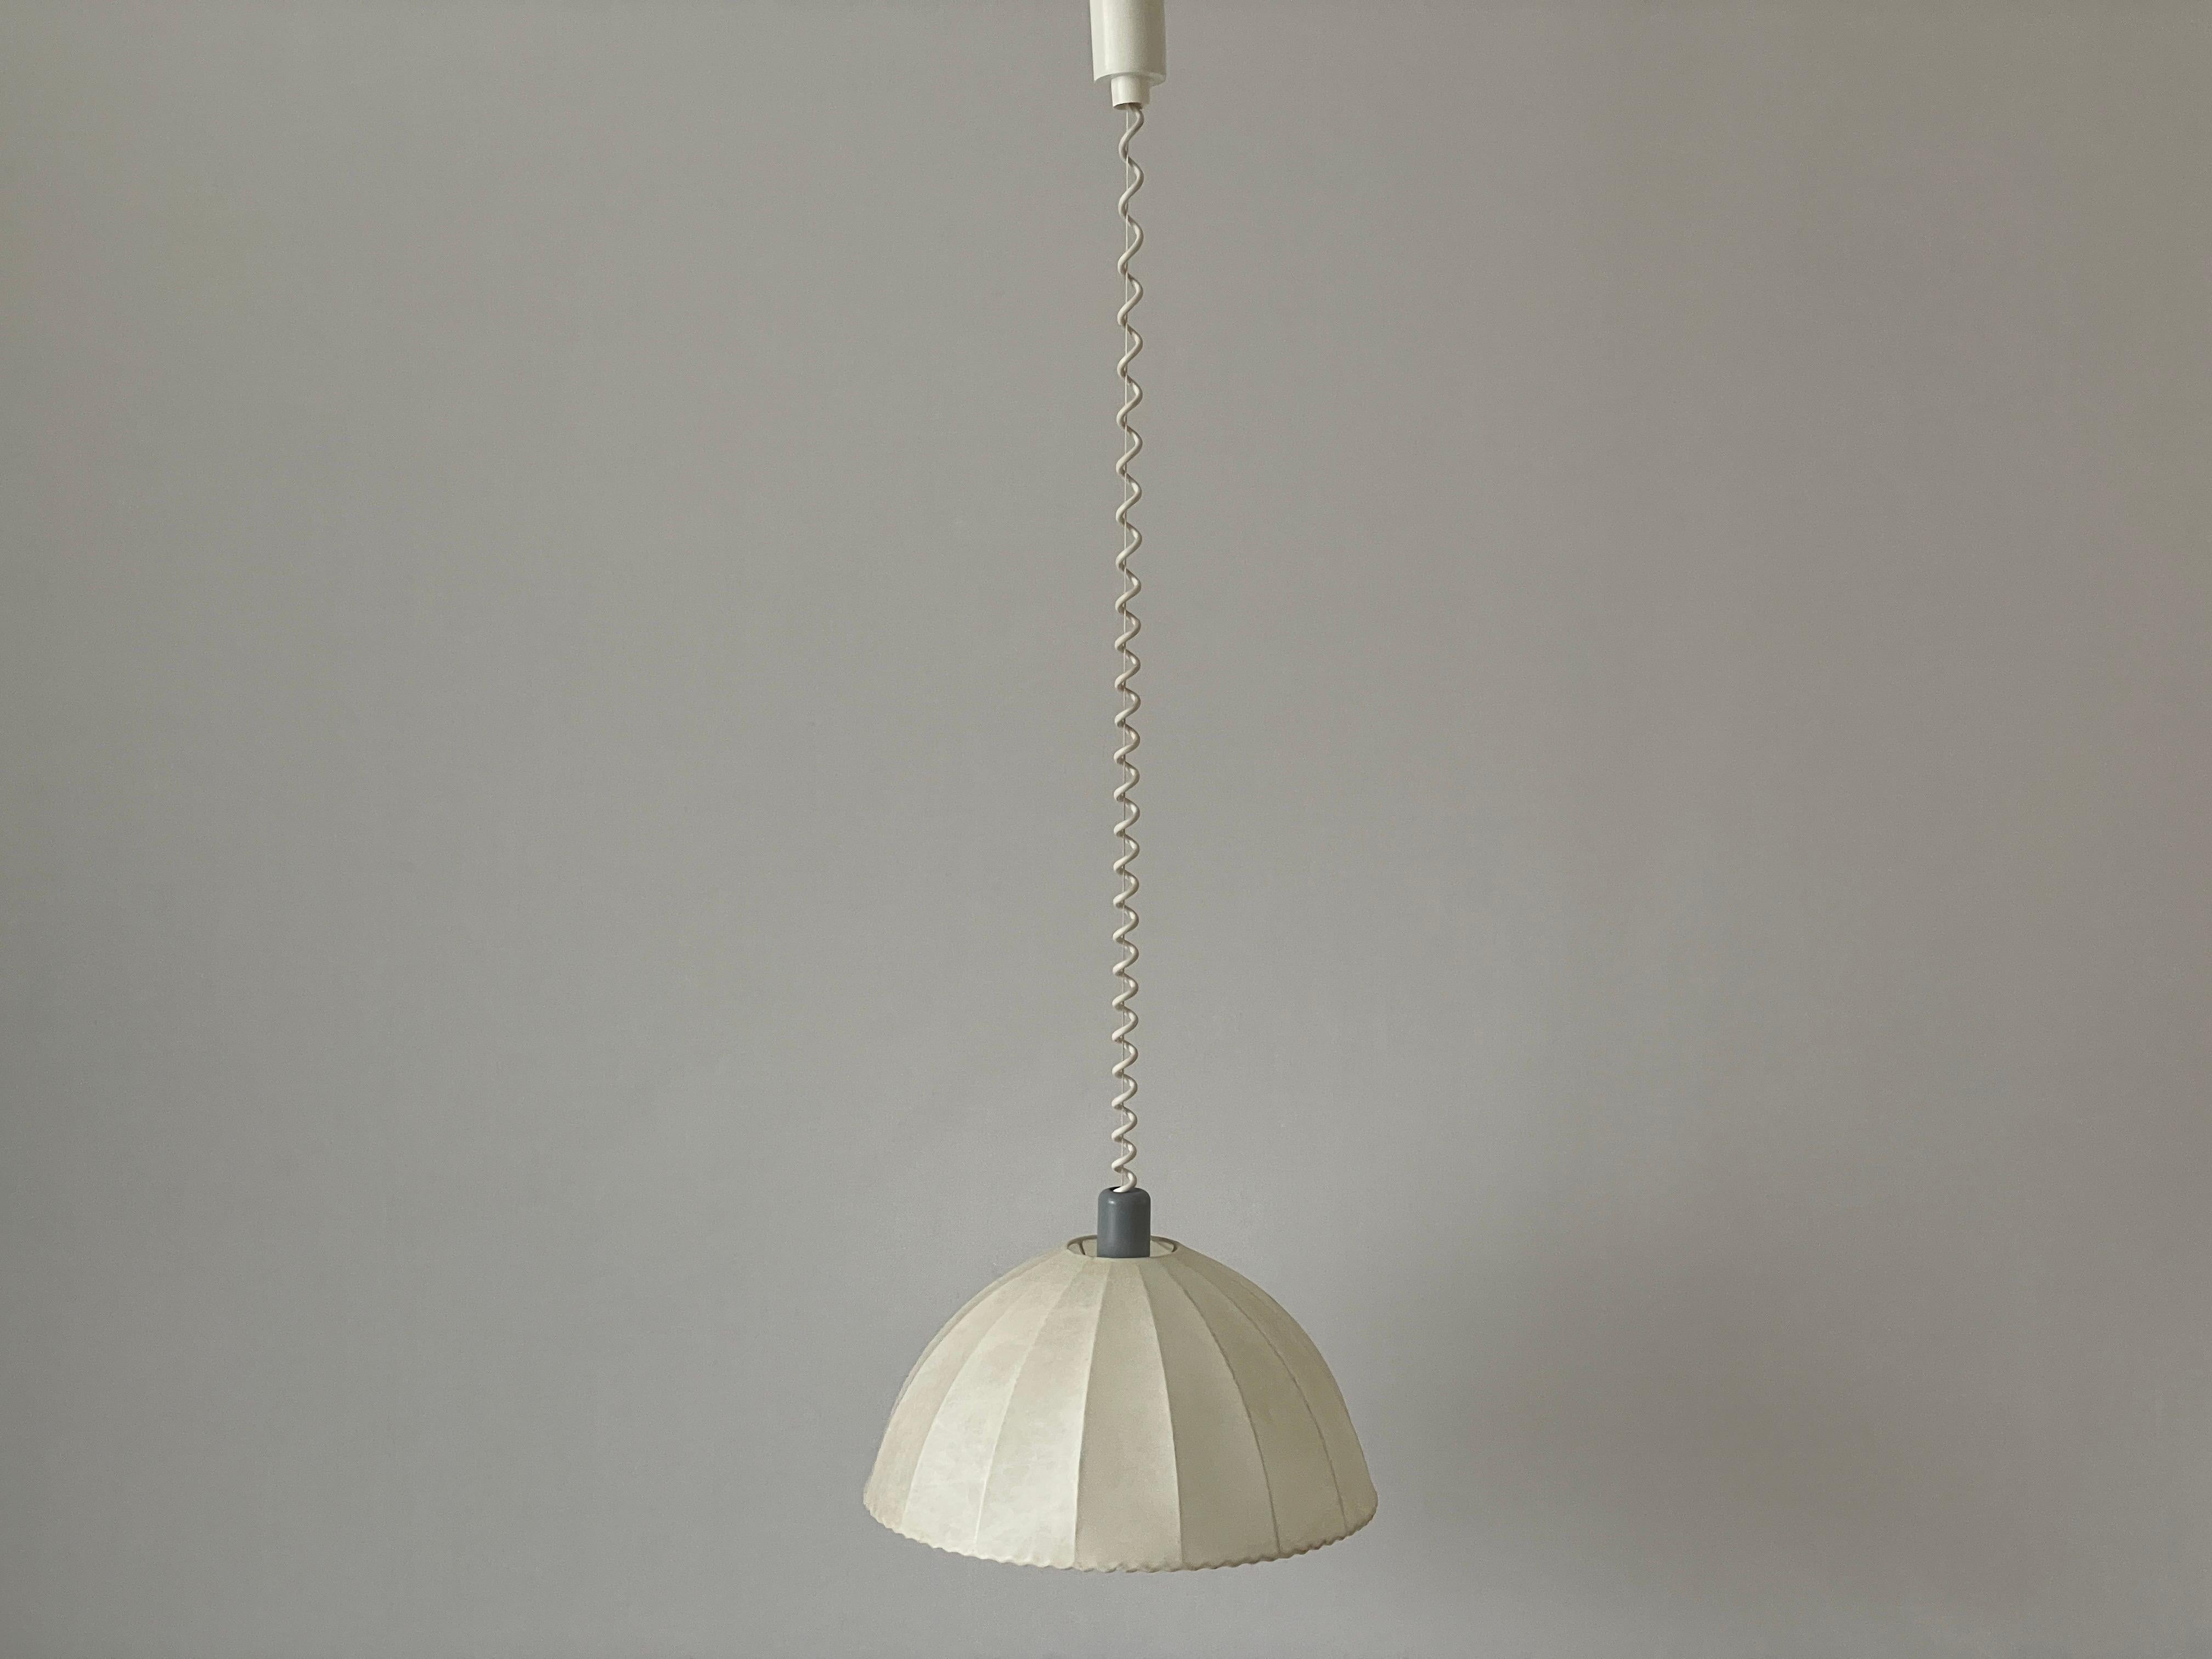 Cocoon Pendant Lamp by Goldkant with Grey Metal Top, 1960s, Germany For Sale 10